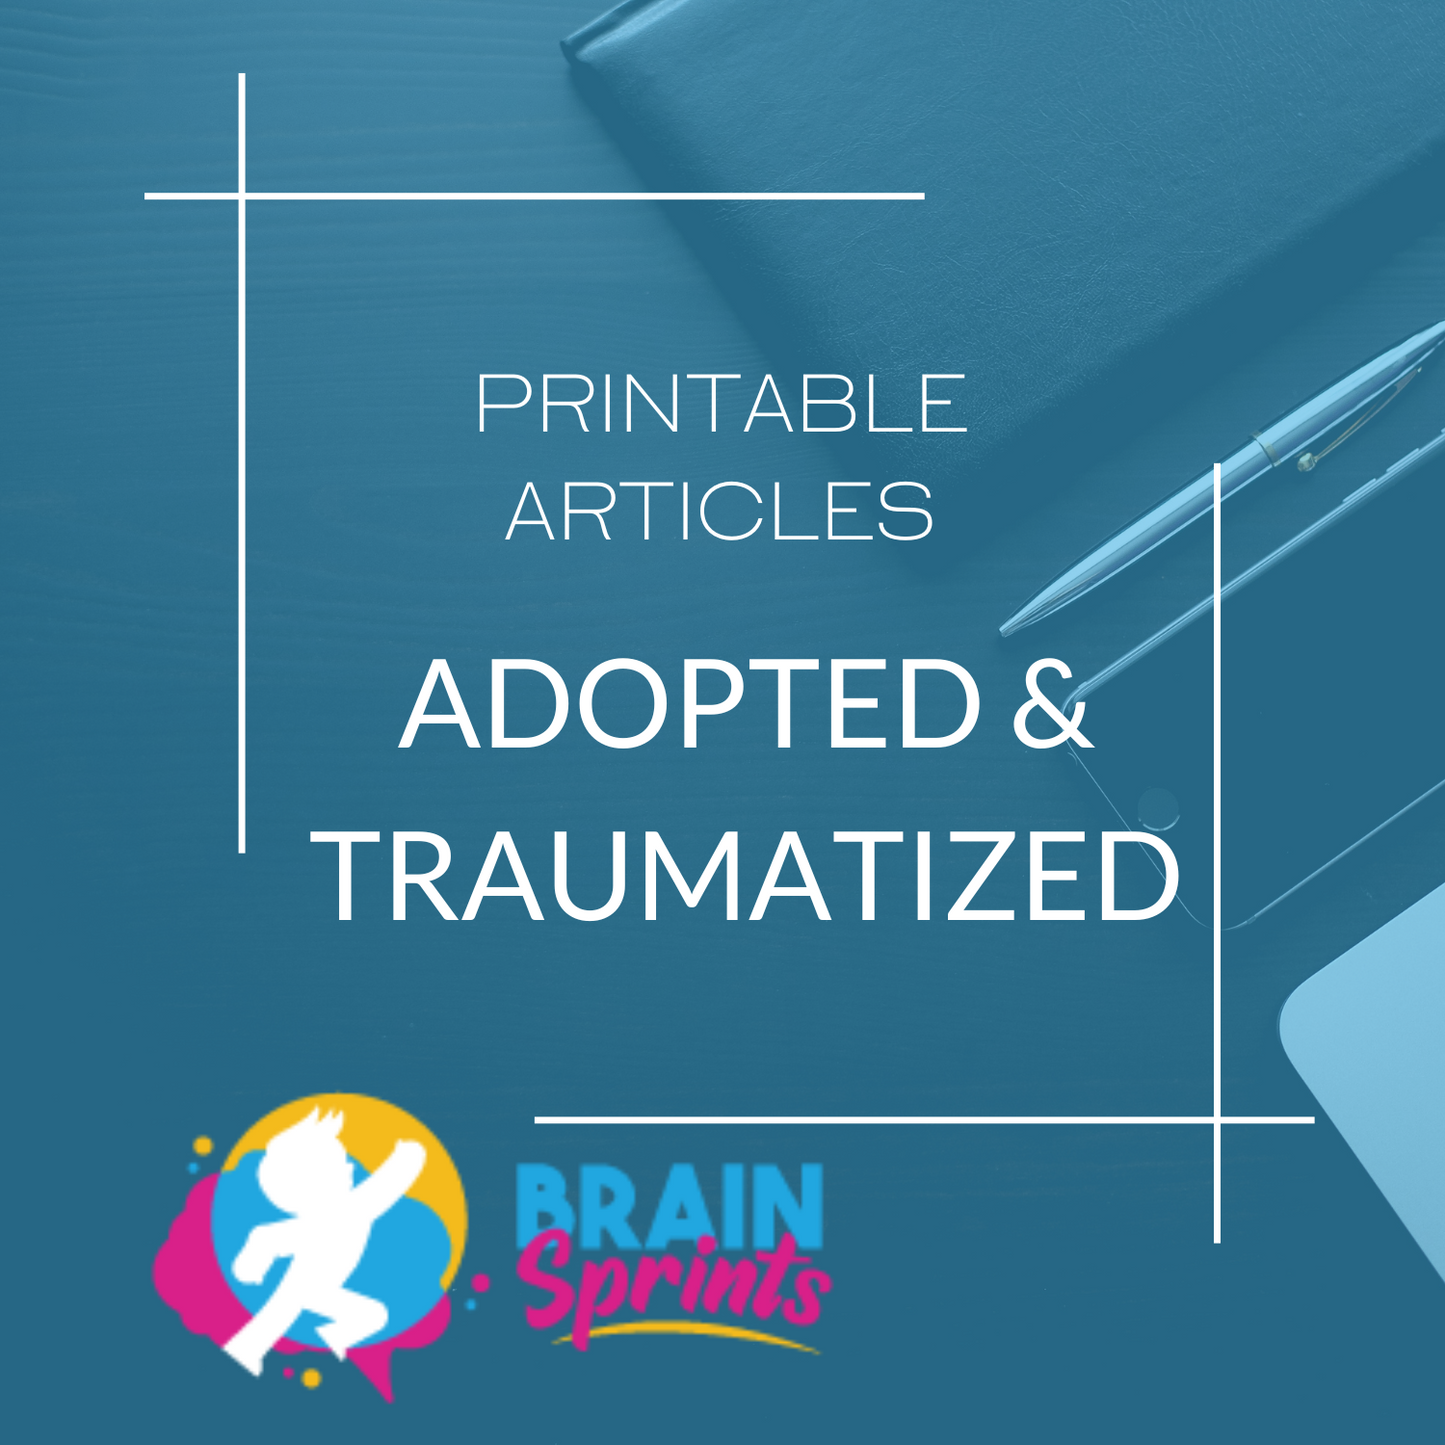 Articles - Adopted and Traumatized